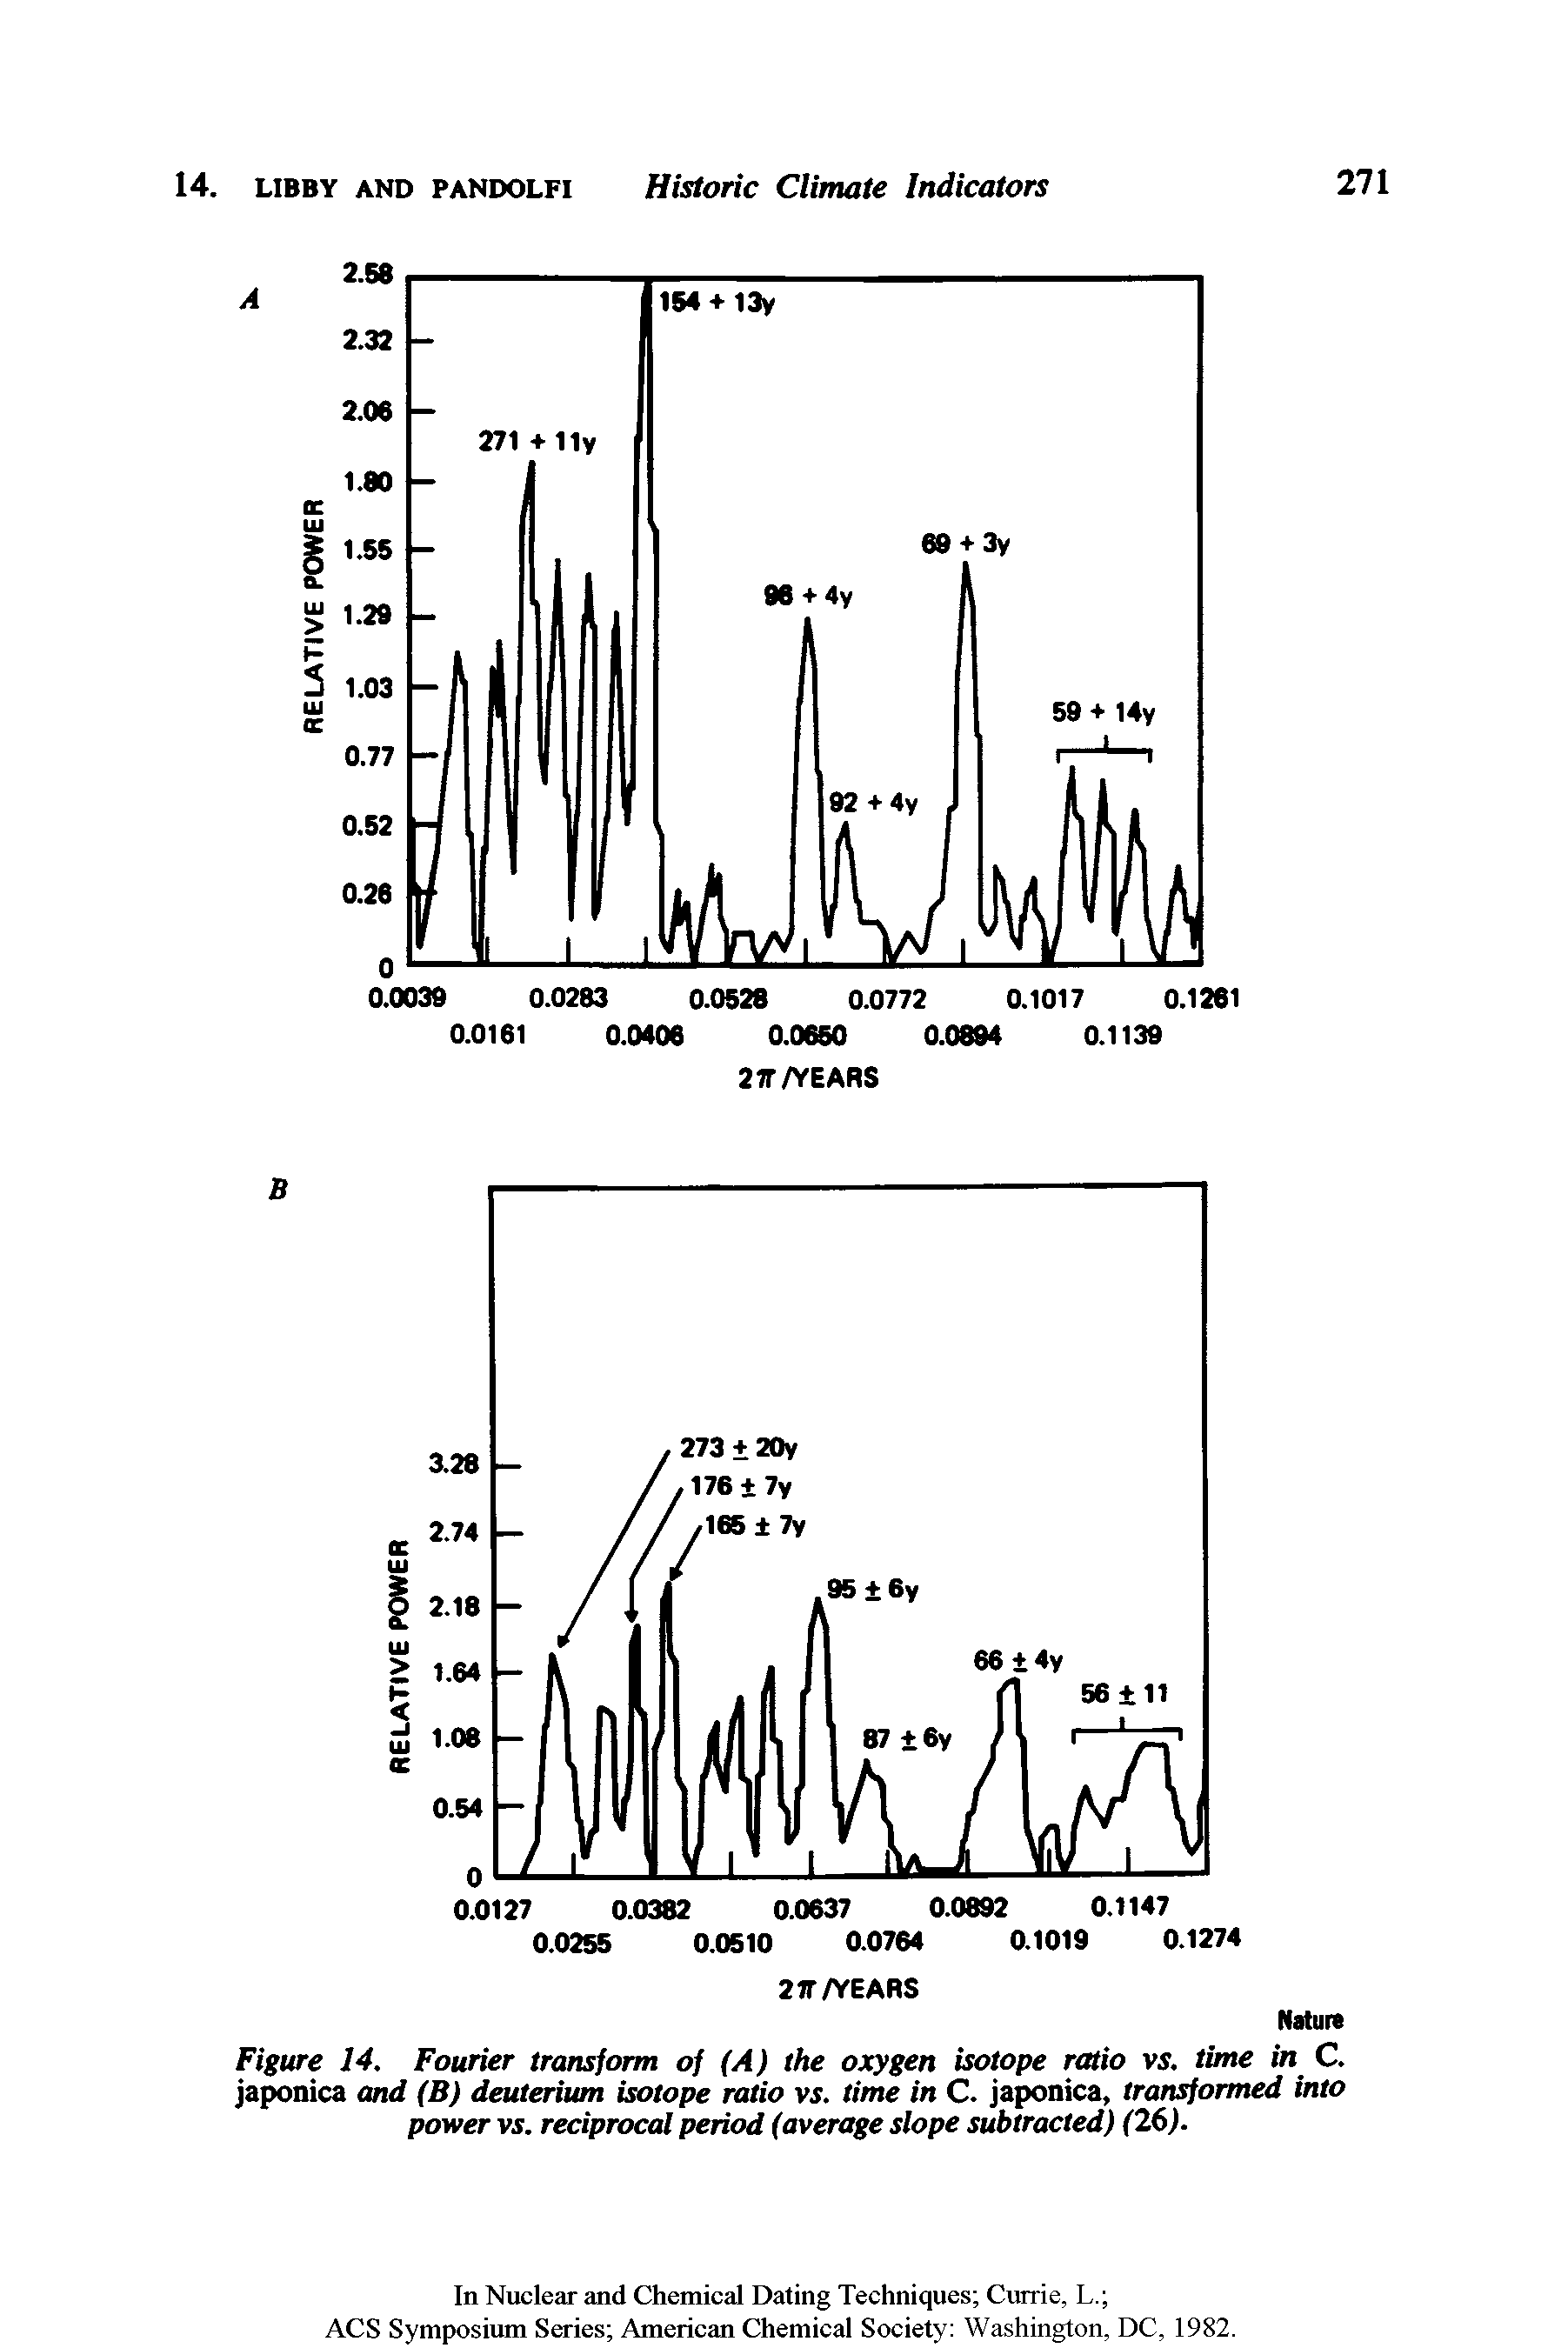 Figure 14. Fourier transform of (A) the oxygen isotope ratio vs. time in C. japonica and (B) deuterium isotope ratio vs. time in C. japonica, transformed into power vs. reciprocal period (average slope subtracted) (26).